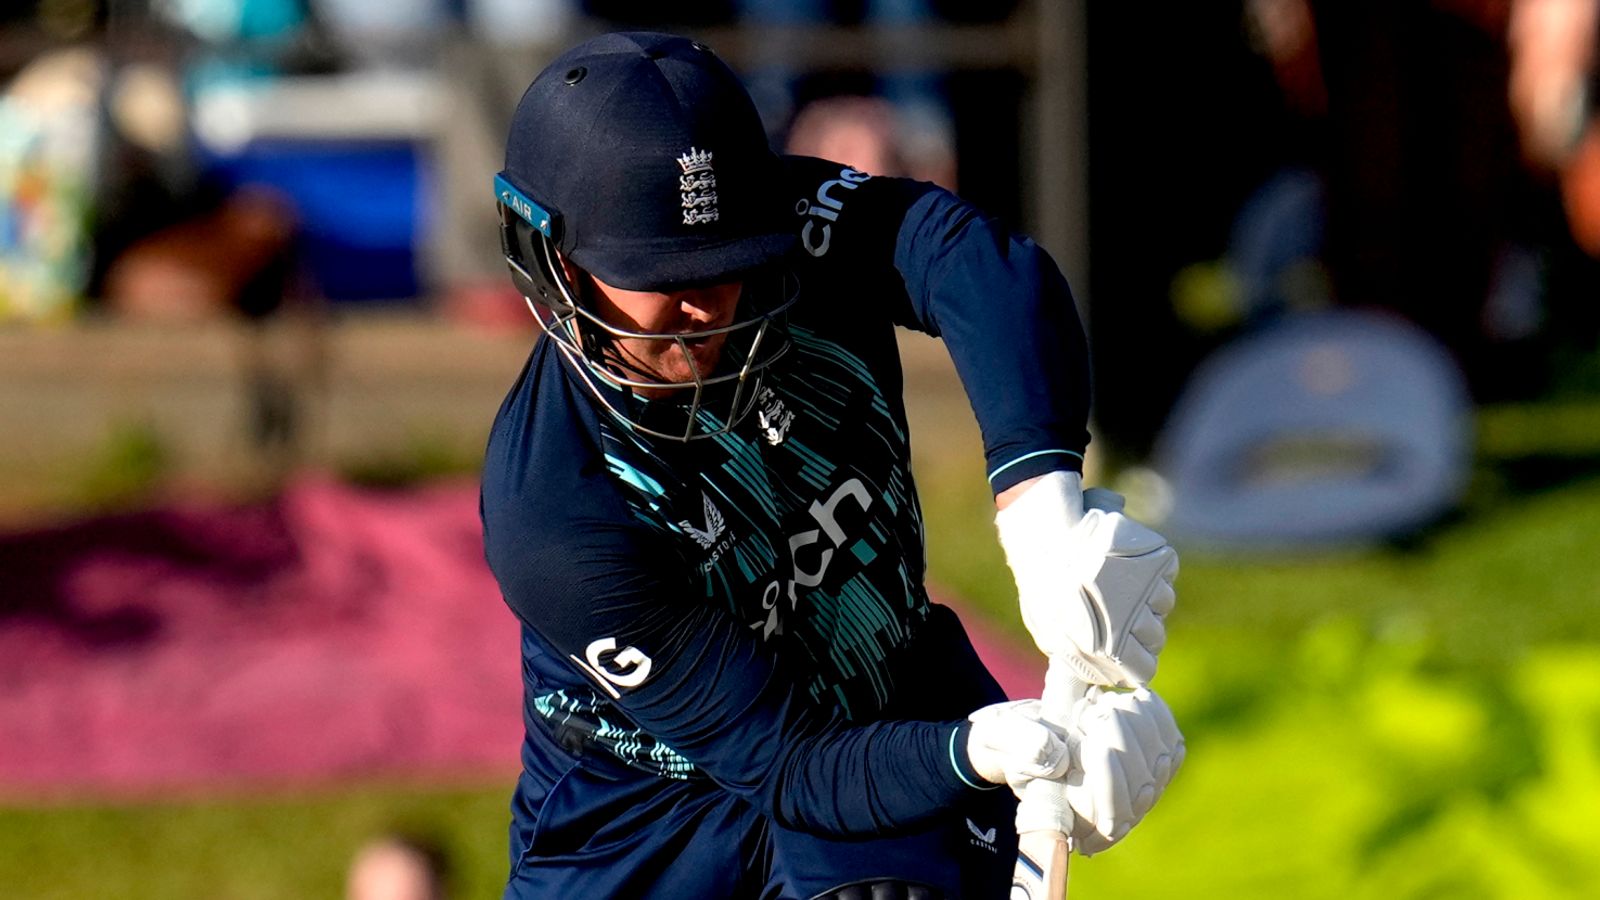 England falter to defeat against South Africa in first ODI despite Jason Roy's ton